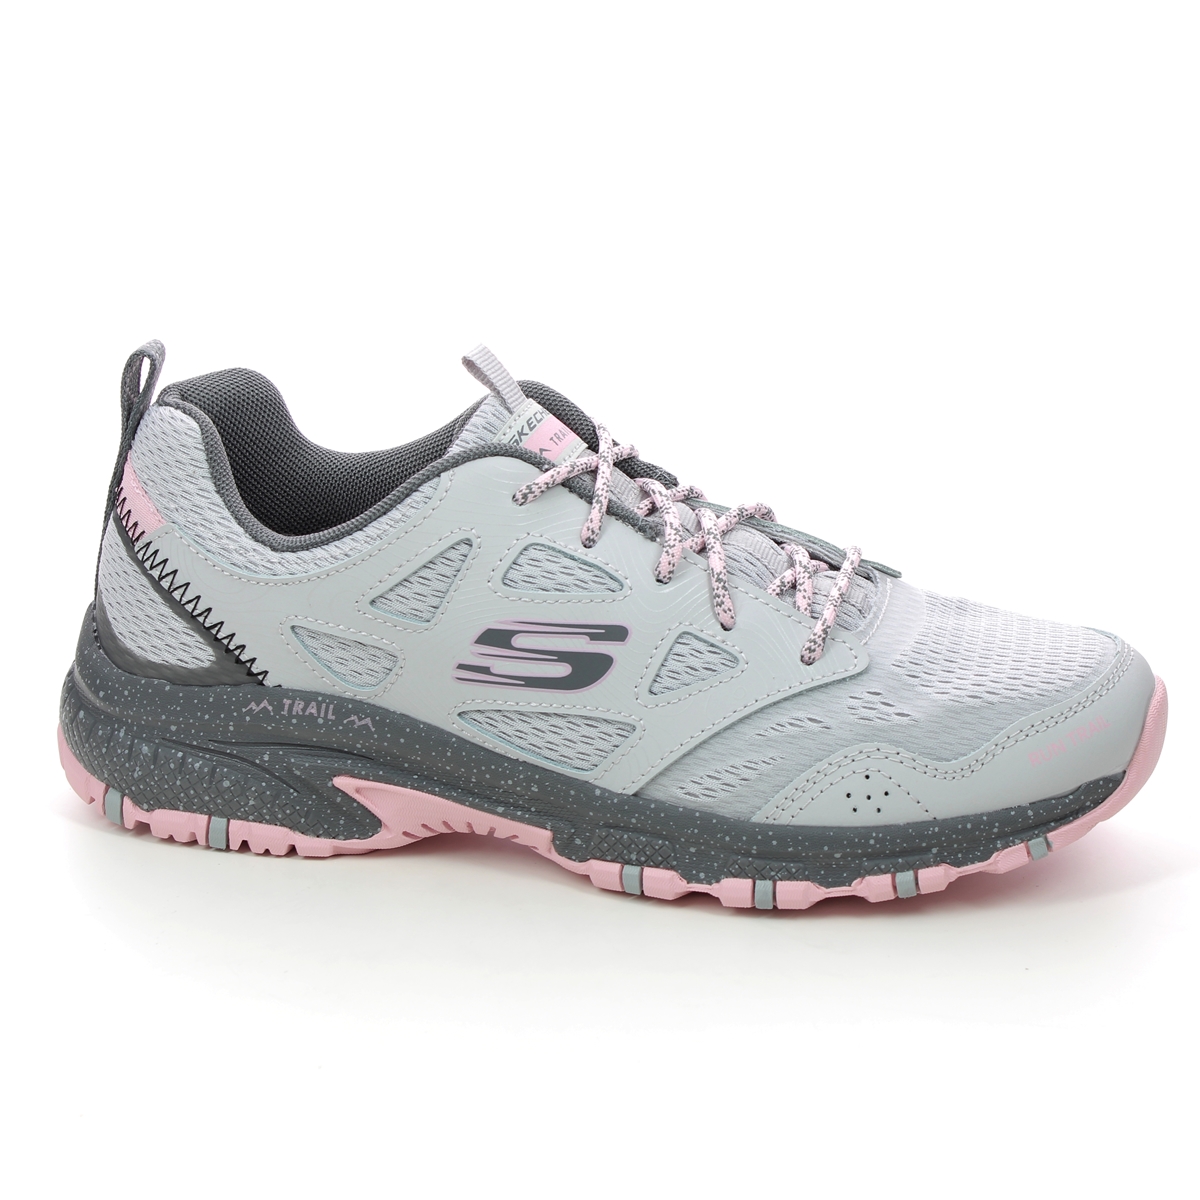 Skechers Hillcrest 149821 GYPK Grey Pink trainers